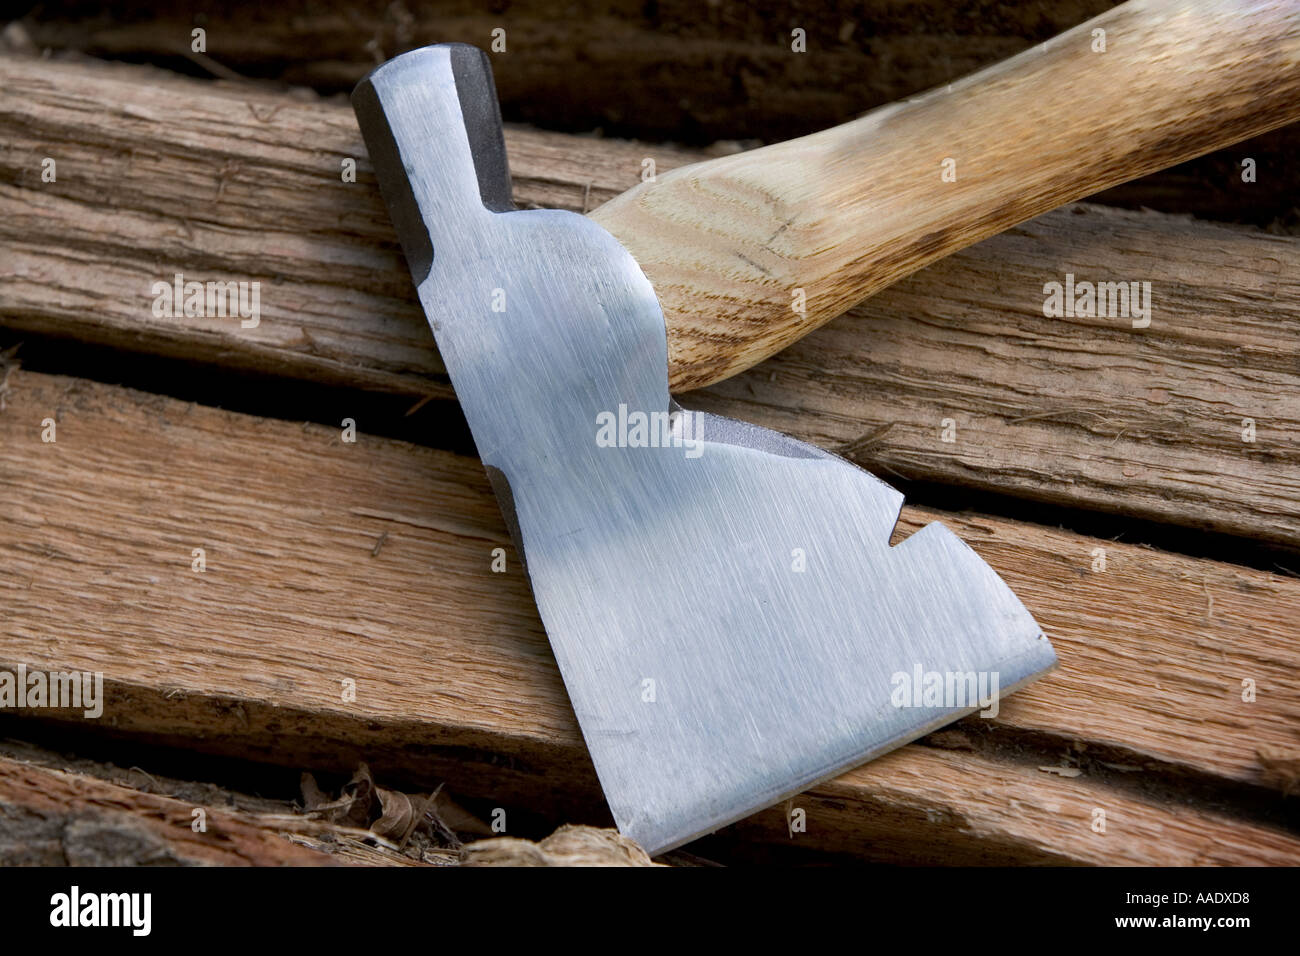 Axe on top of a pile of firewood Stock Photo